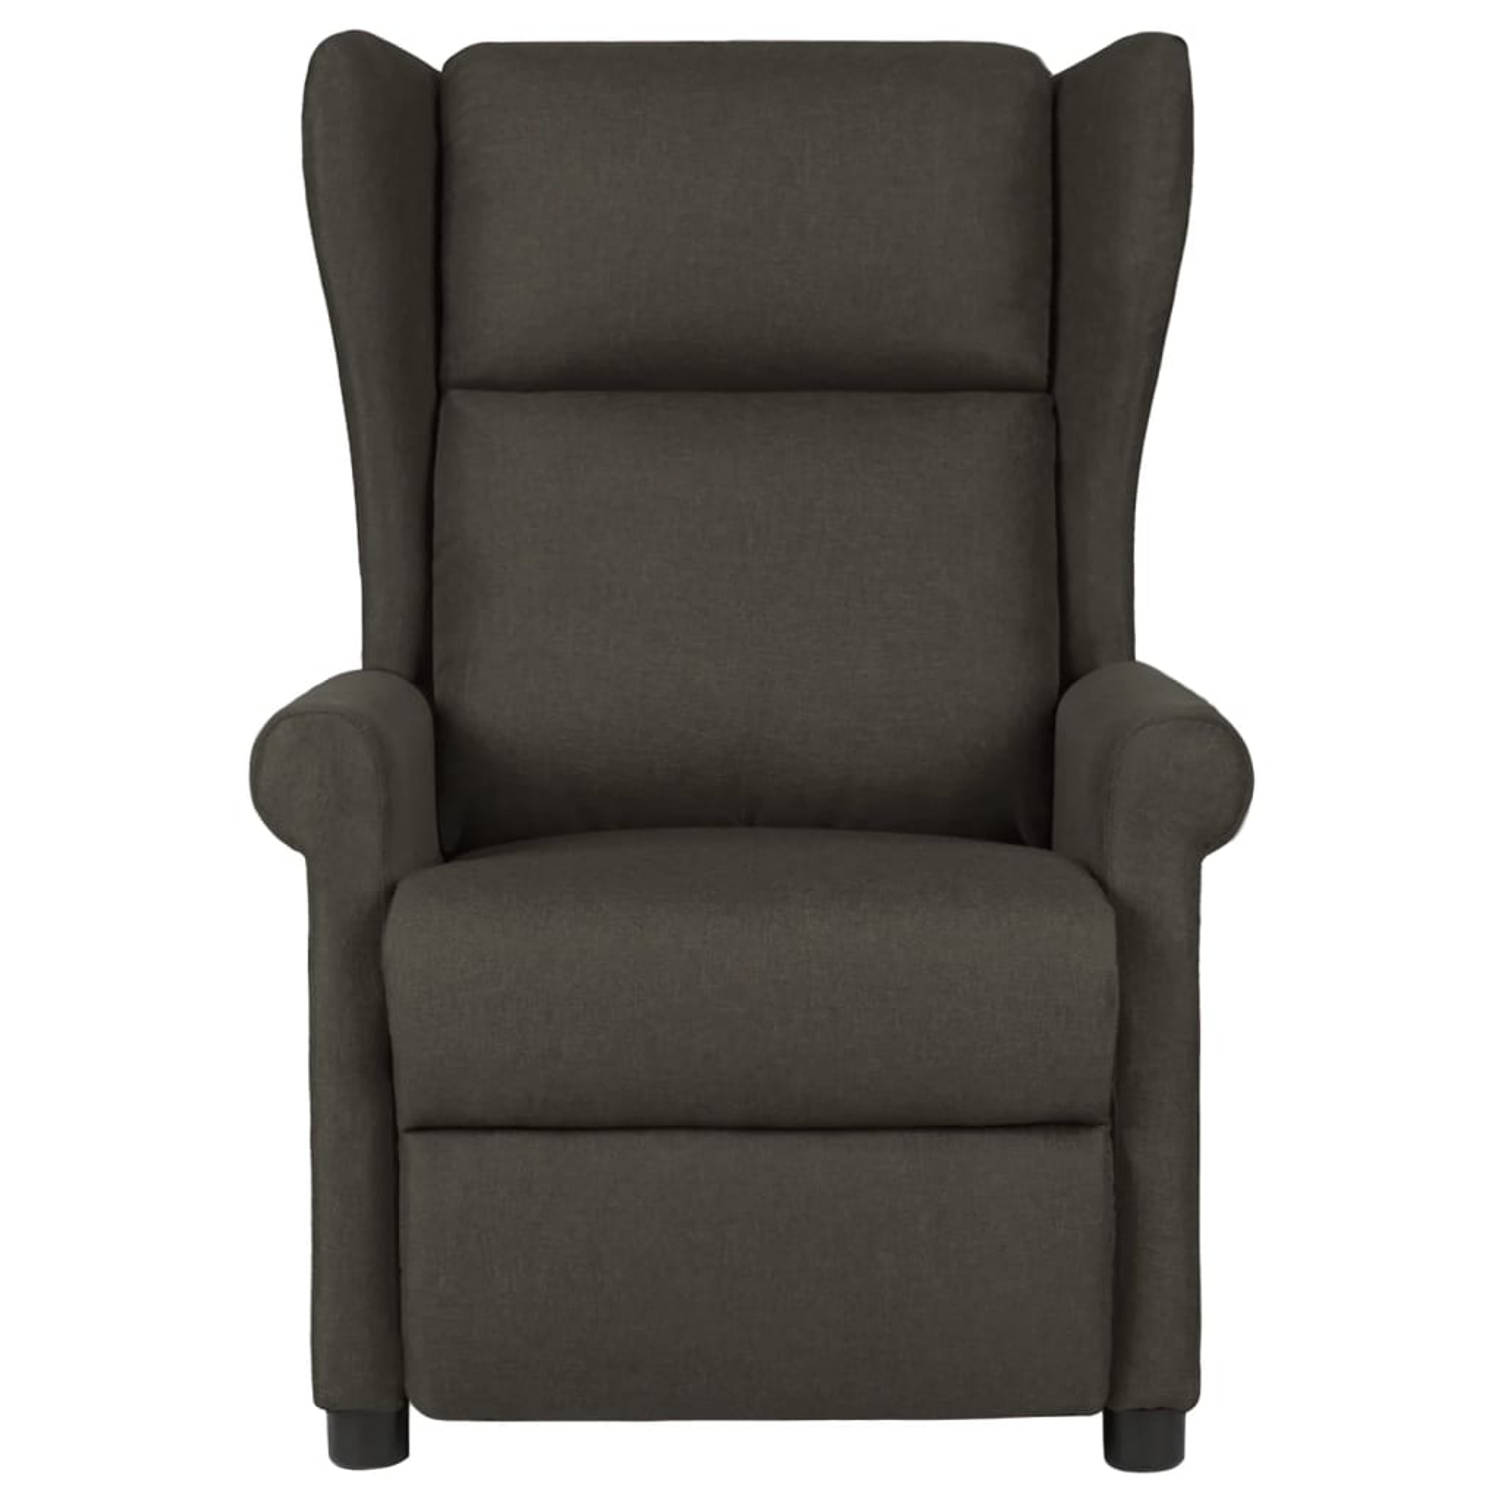 The Living Store Leunstoel stof taupe - Fauteuil